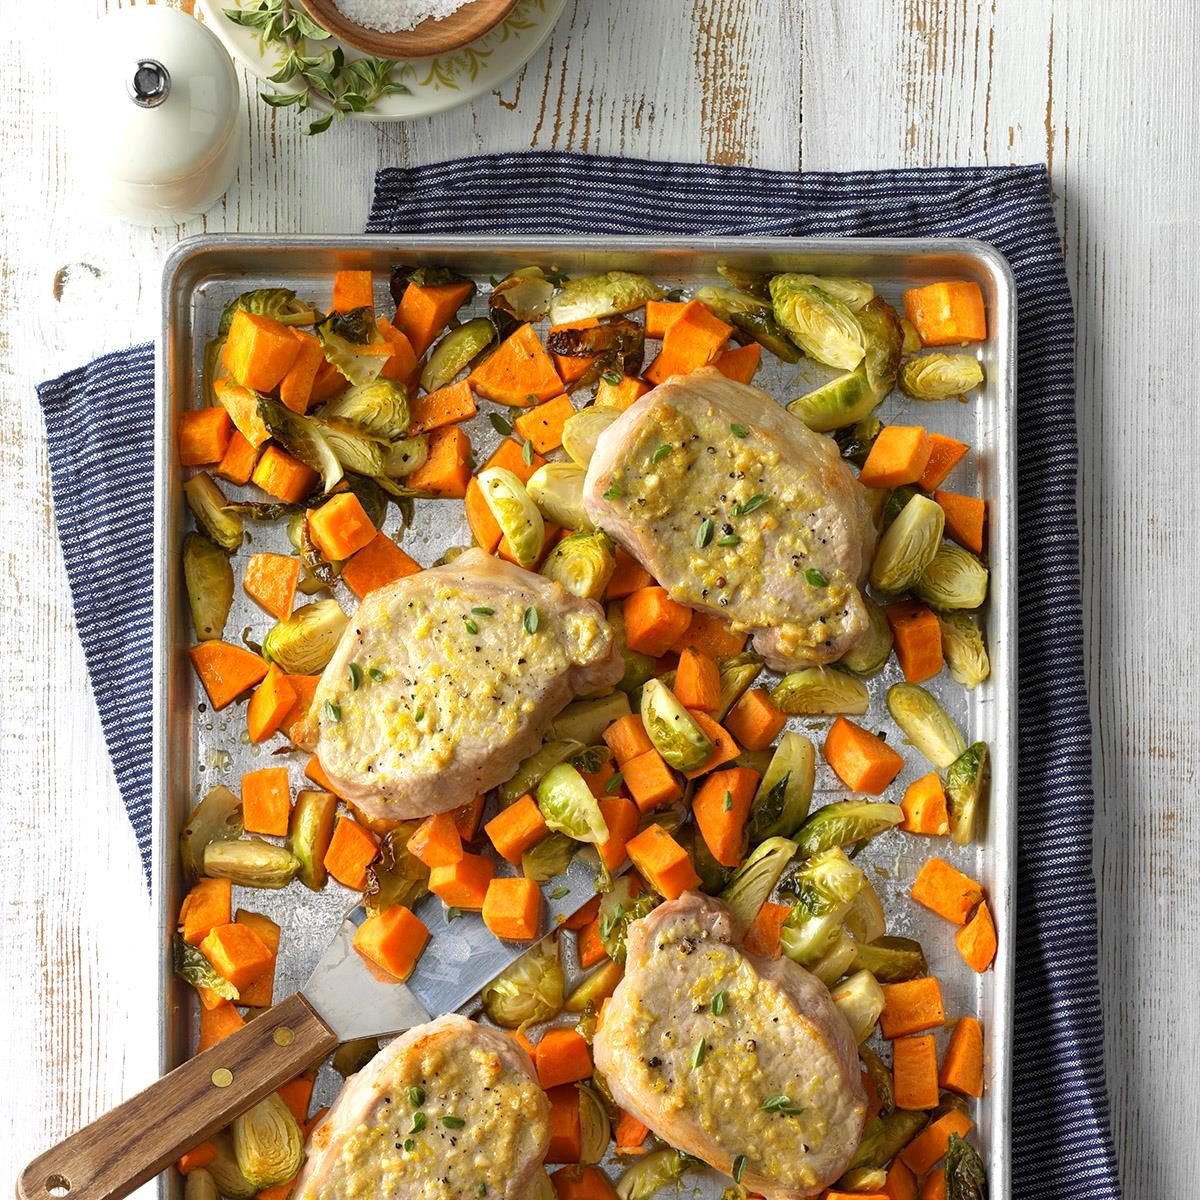 <p>Most nights I need something that I can get on the table with minimal effort and delicious results. This sheet-pan supper has become an all-time favorite, not only because of its bright flavors but also because of its speedy cleanup time. —Elisabeth Larsen, Pleasant Grove, Utah</p> <div class="listicle-page__buttons"> <div class="listicle-page__cta-button"><a href='https://www.tasteofhome.com/recipes/lemon-dijon-pork-sheet-pan-supper/'>Get Recipe</a></div> </div>